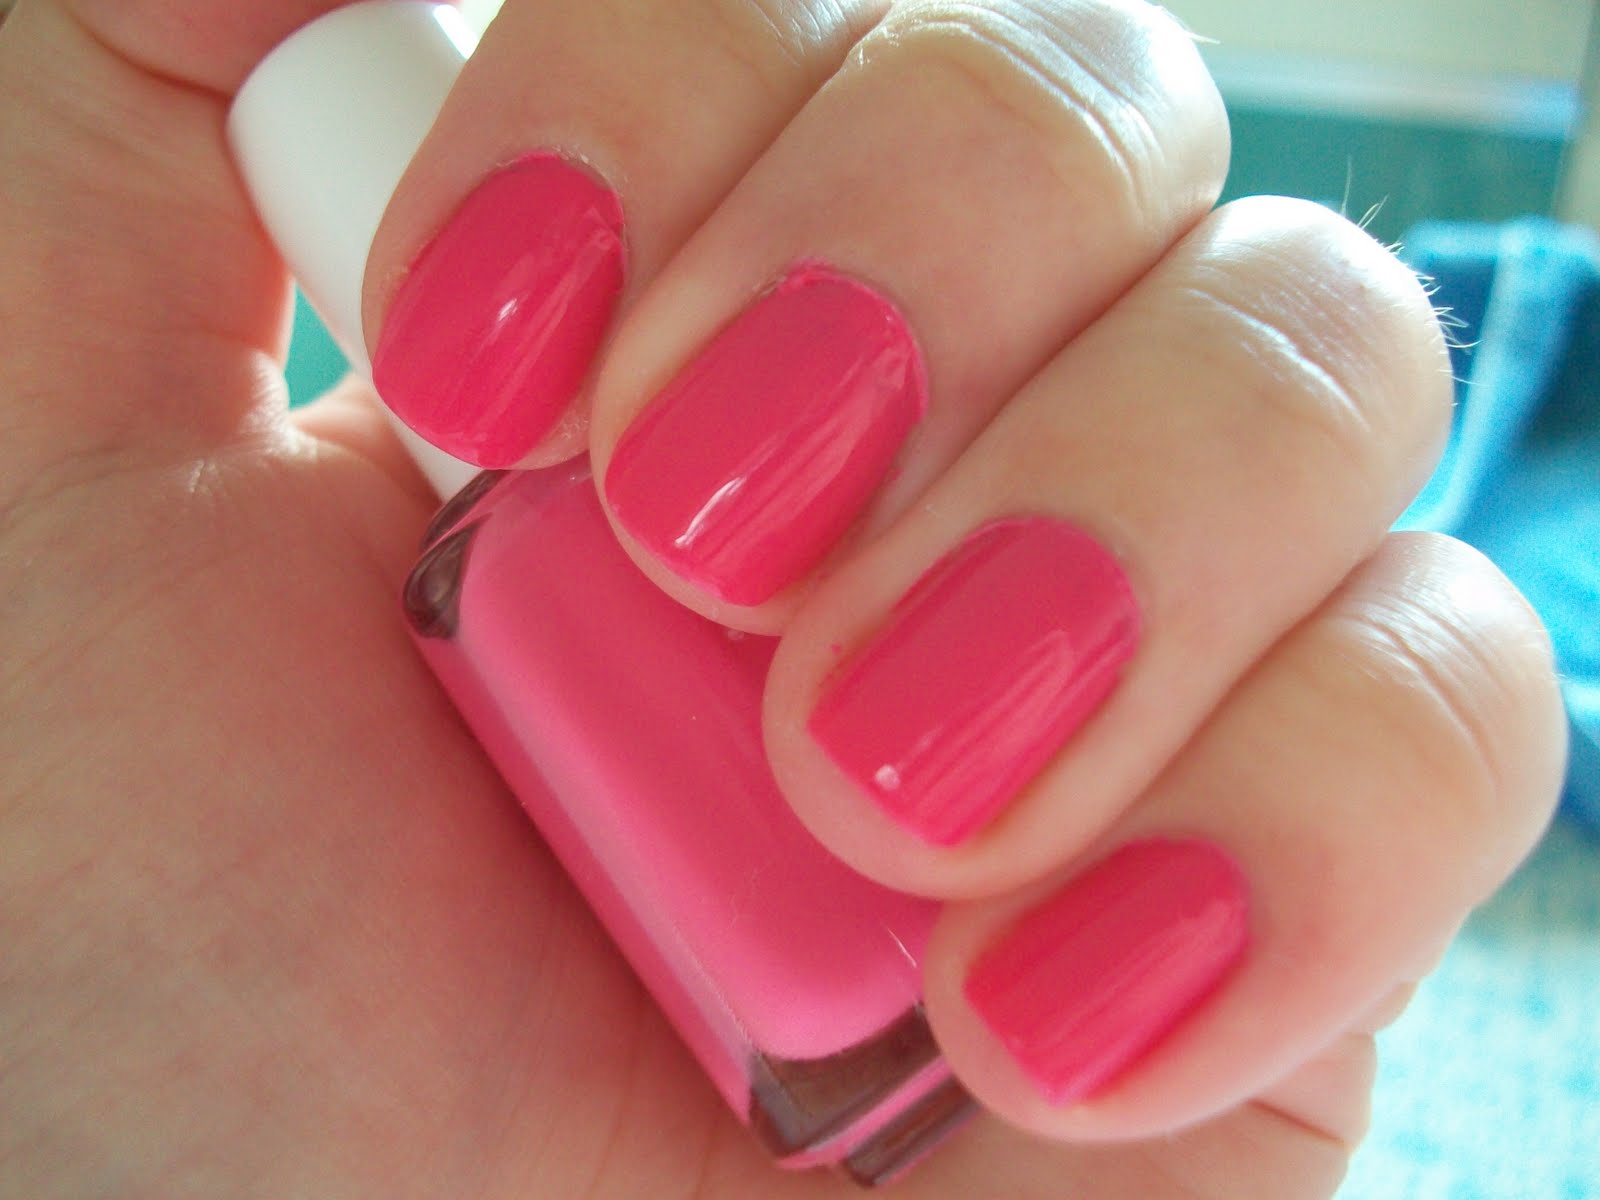 1. "Top 10 Best Nail Polish Colors for May" - wide 9